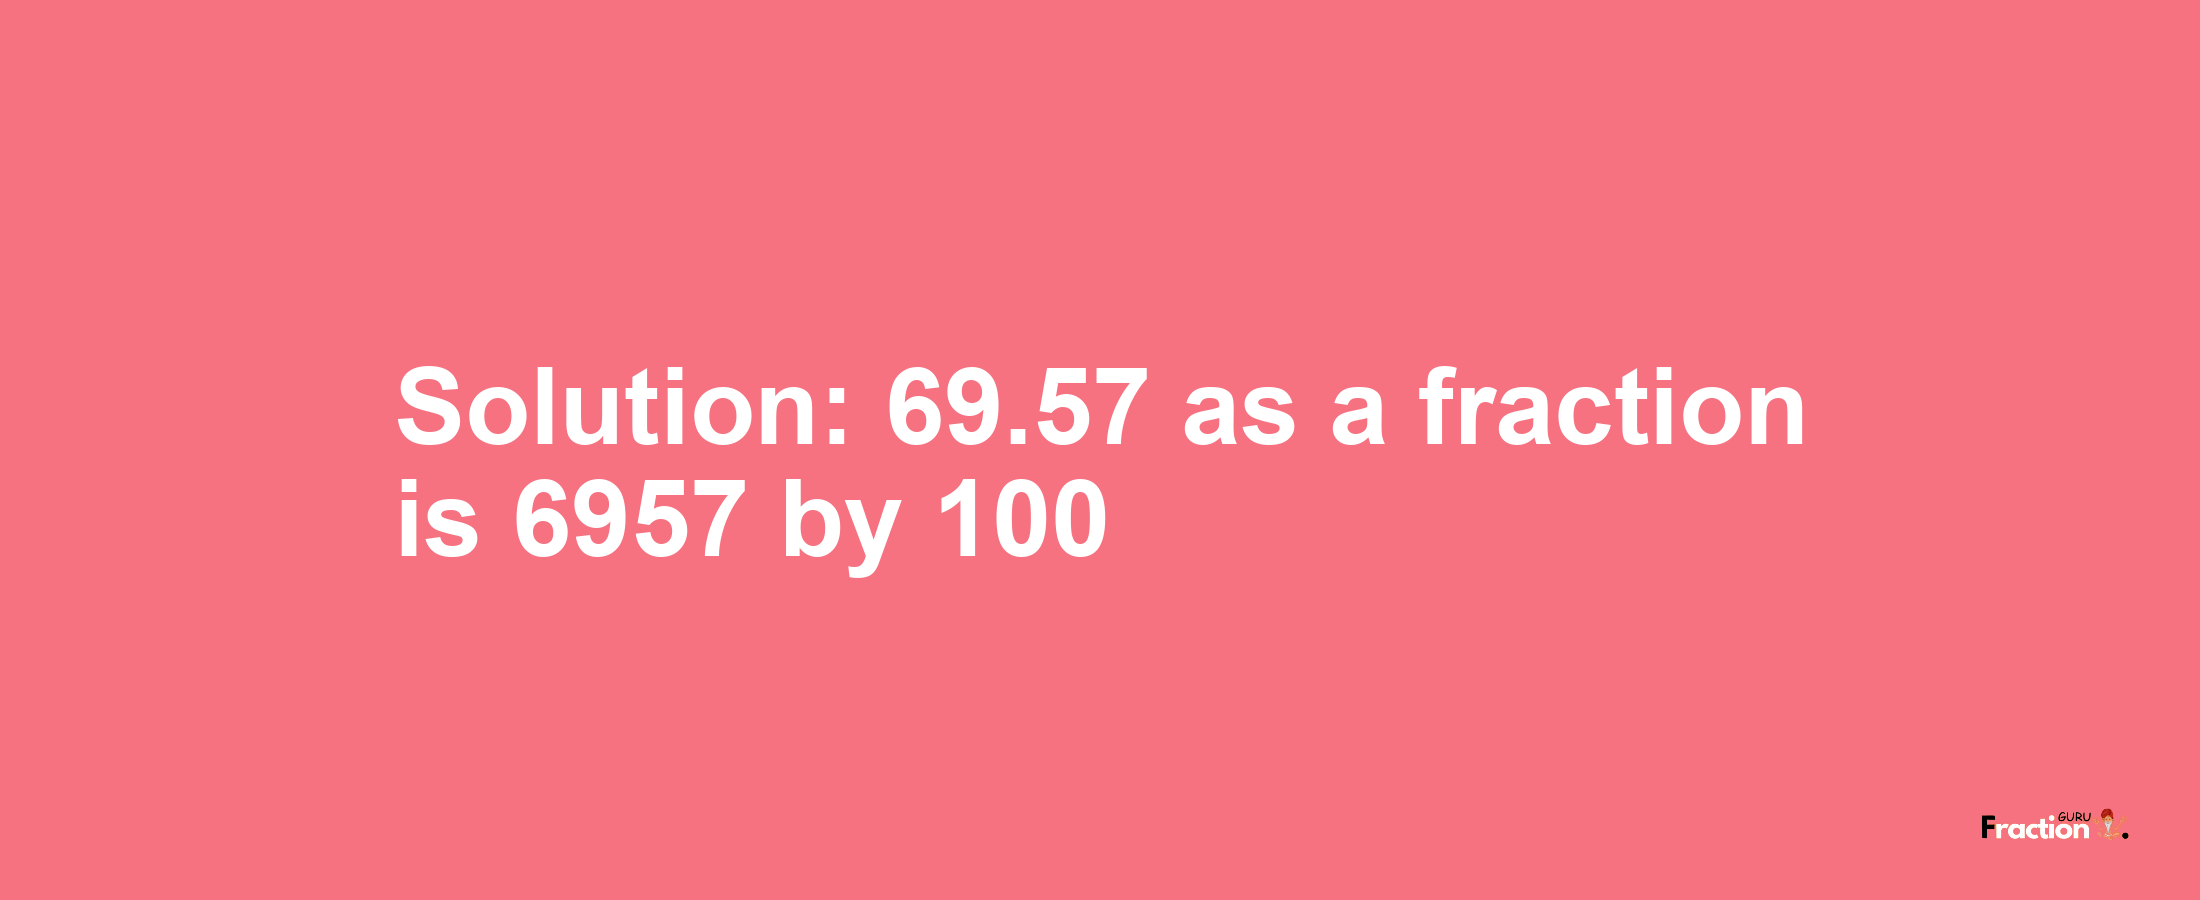 Solution:69.57 as a fraction is 6957/100